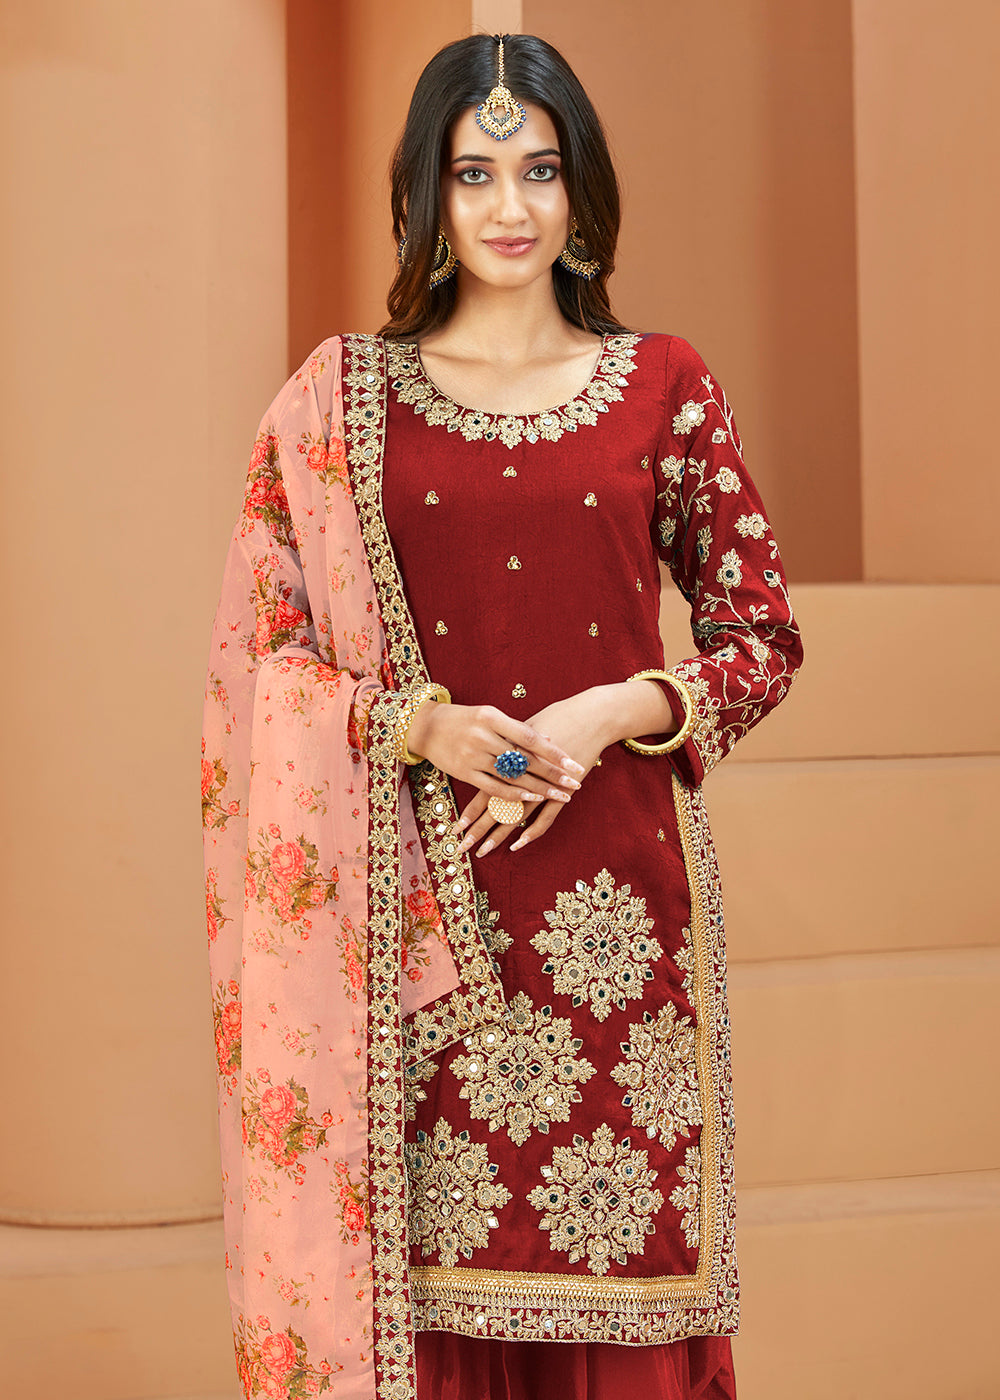 Buy Now Charming Art Silk Red Mirror Embroidered Patiala Salwar Kameez Online in USA, UK, Canada, Germany, Australia & Worldwide at Empress Clothing. 